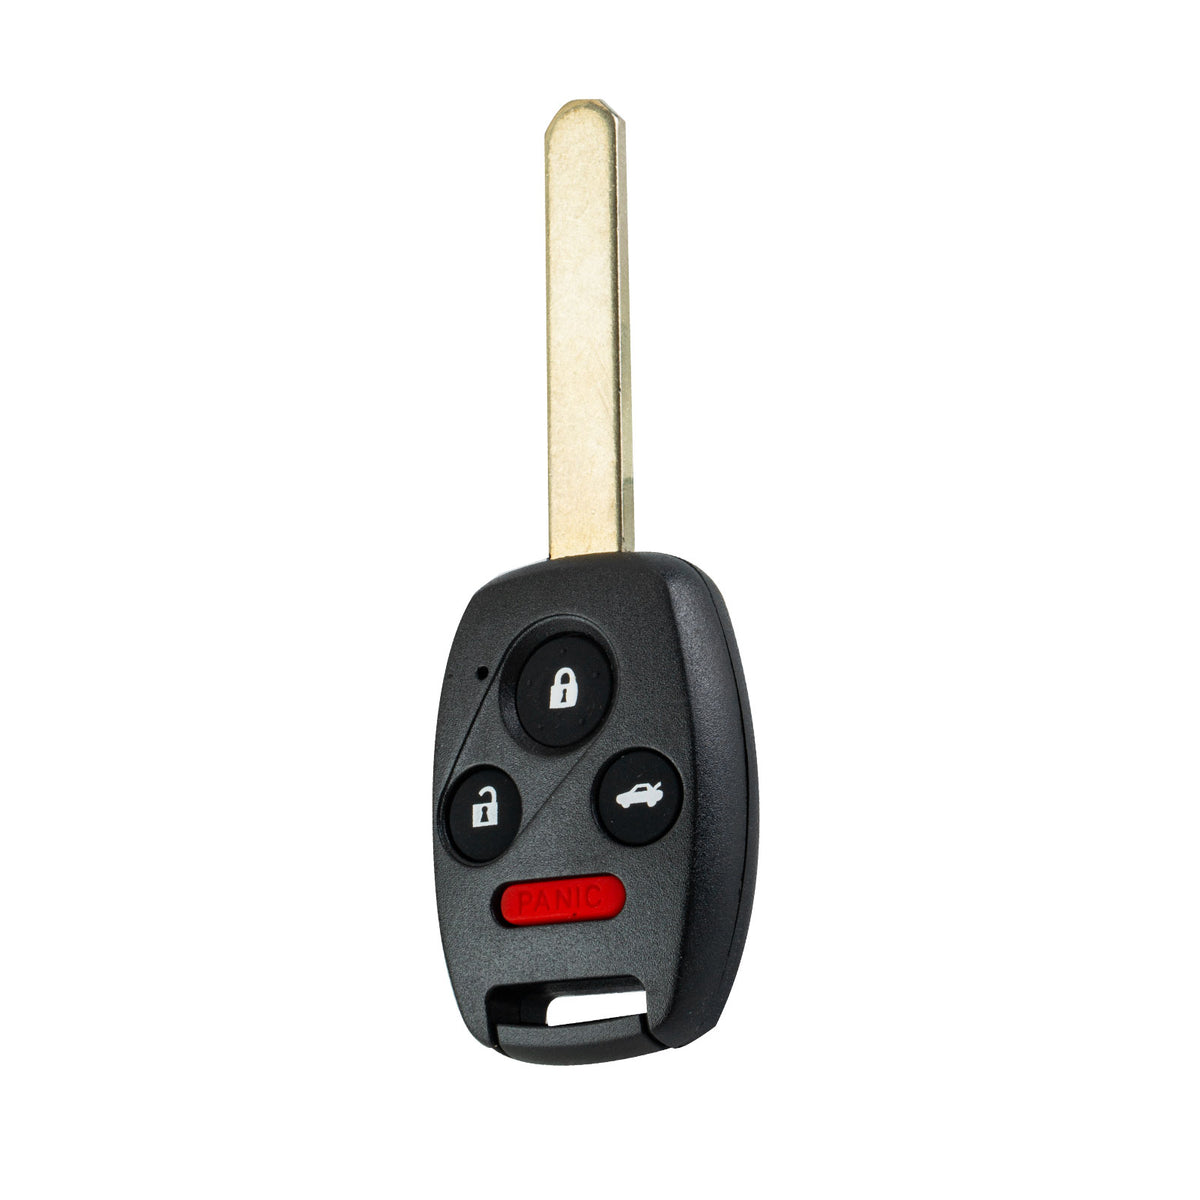 Button Car Remote Control Keyless Entry Remote 313.8MHZ Replacement for 2006-2011 Civic EX Si N5F-S0084A  KR-H4SB